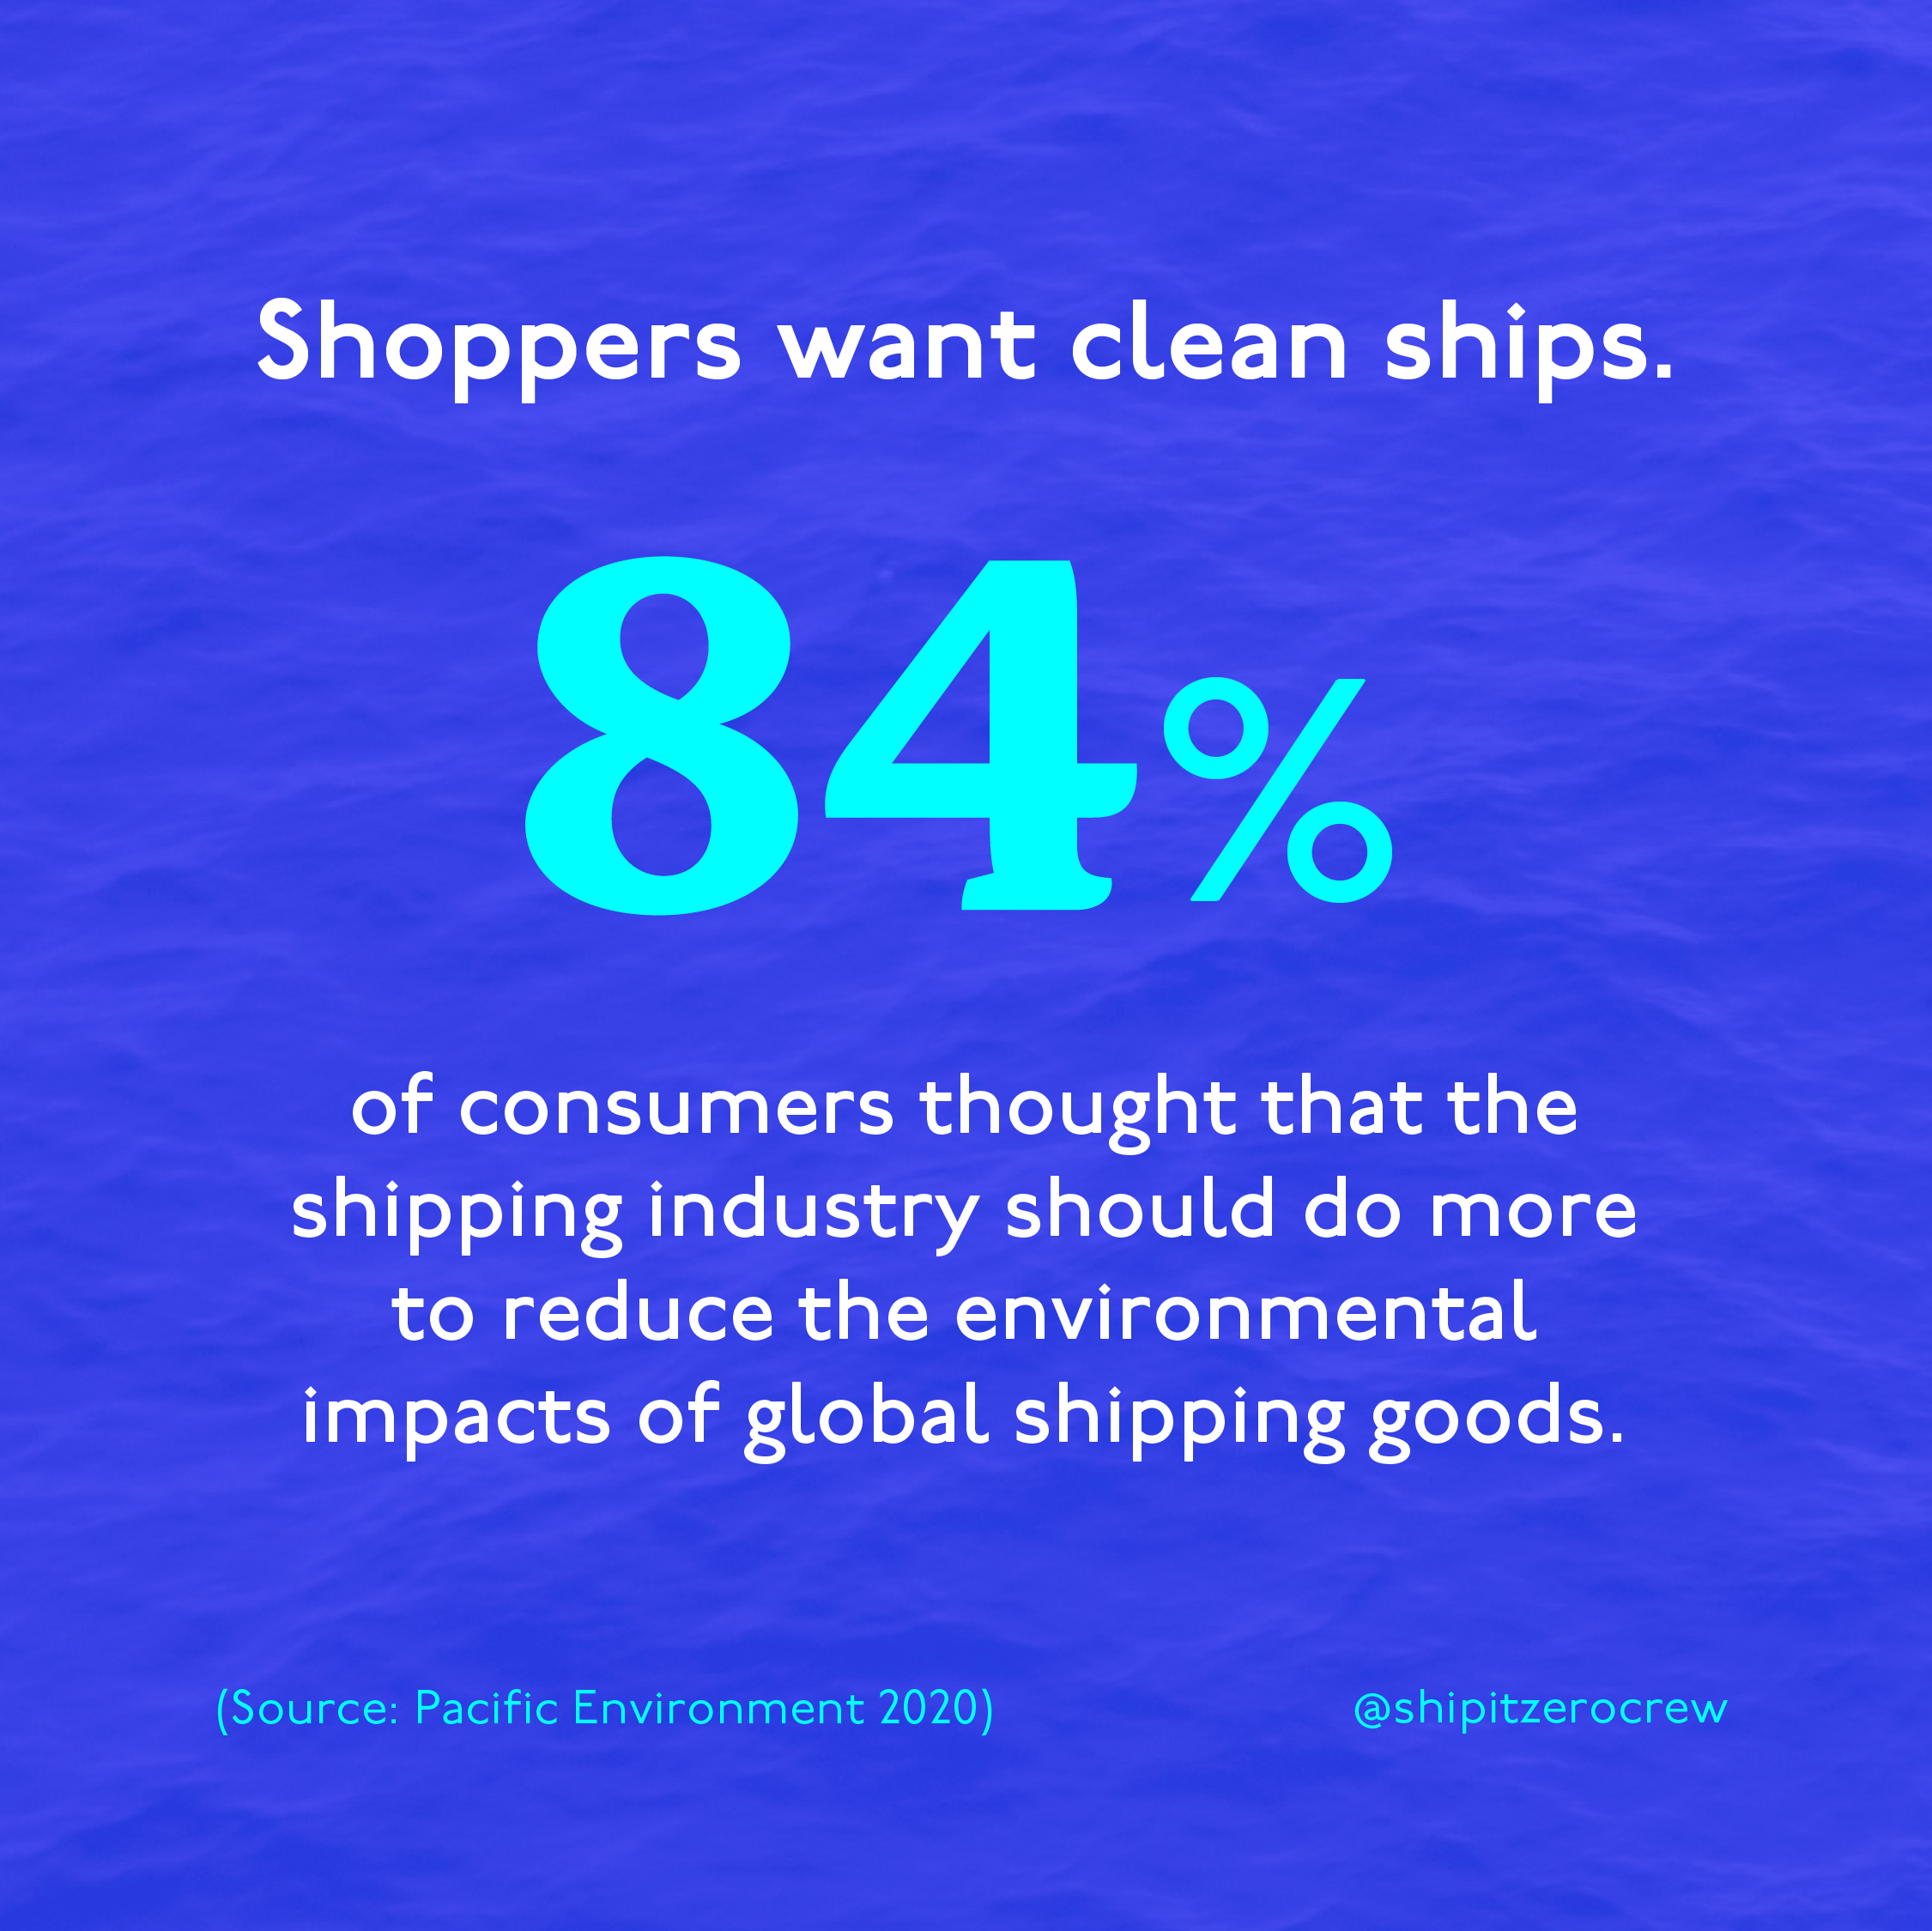 Graphic showing the data polled from shoppers who want clean ships